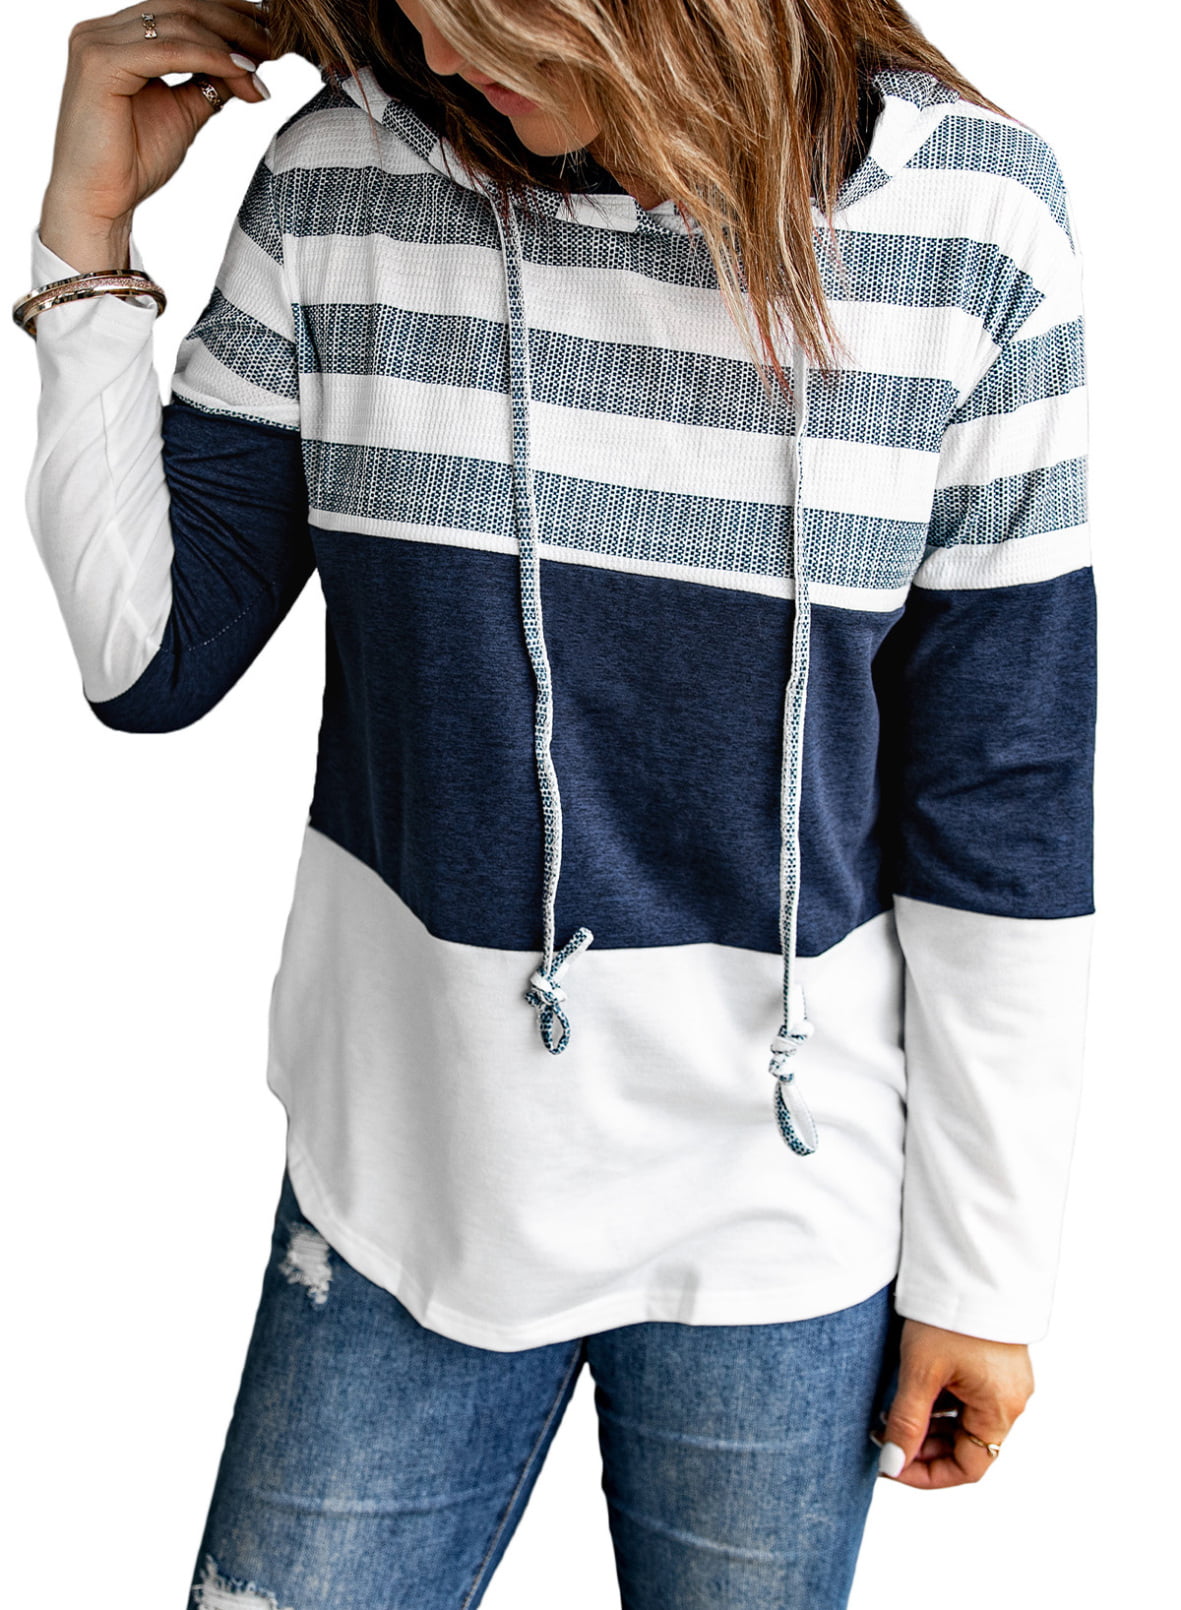 Womens Long Sleeve Striped Color Block Tops Casual Loose Patchwork Pullover Sweatshirts